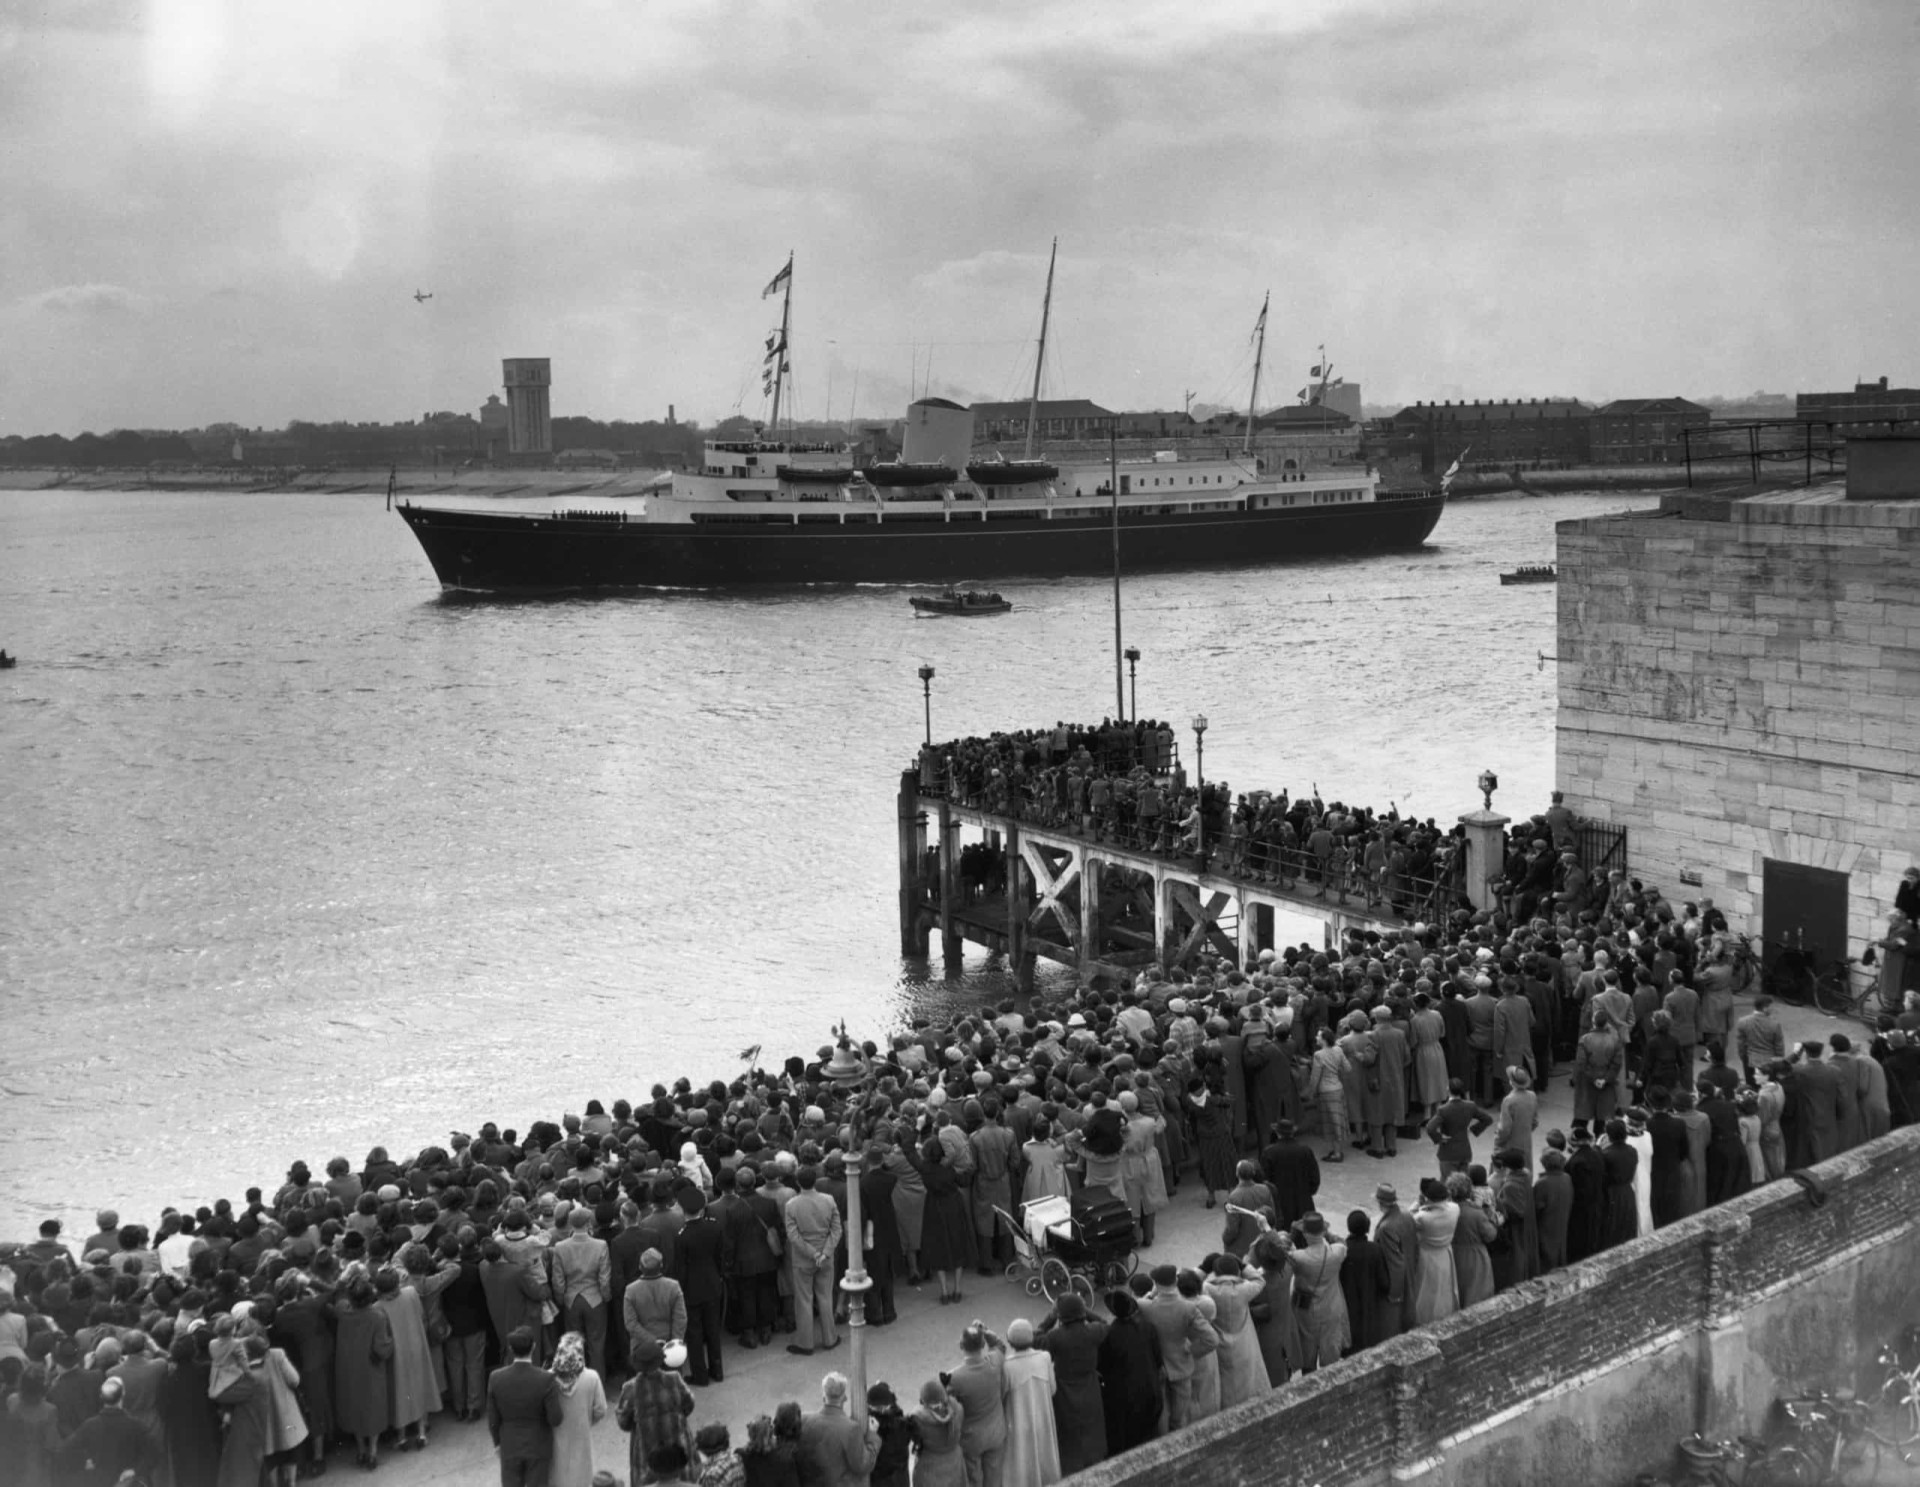 <p>A crowd gathers to bid the Royal Yacht <em>Britannia</em> farewell upon her departure from Portsmouth, England, on April 14, 1954 on her maiden voyage to Malta. The vessel was ultimately bound for Tobruk, in Libya.</p><p><a href="https://www.msn.com/en-ph/community/channel/vid-7xx8mnucu55yw63we9va2gwr7uihbxwc68fxqp25x6tg4ftibpra?cvid=94631541bc0f4f89bfd59158d696ad7e">Follow us and access great exclusive content every day</a></p>